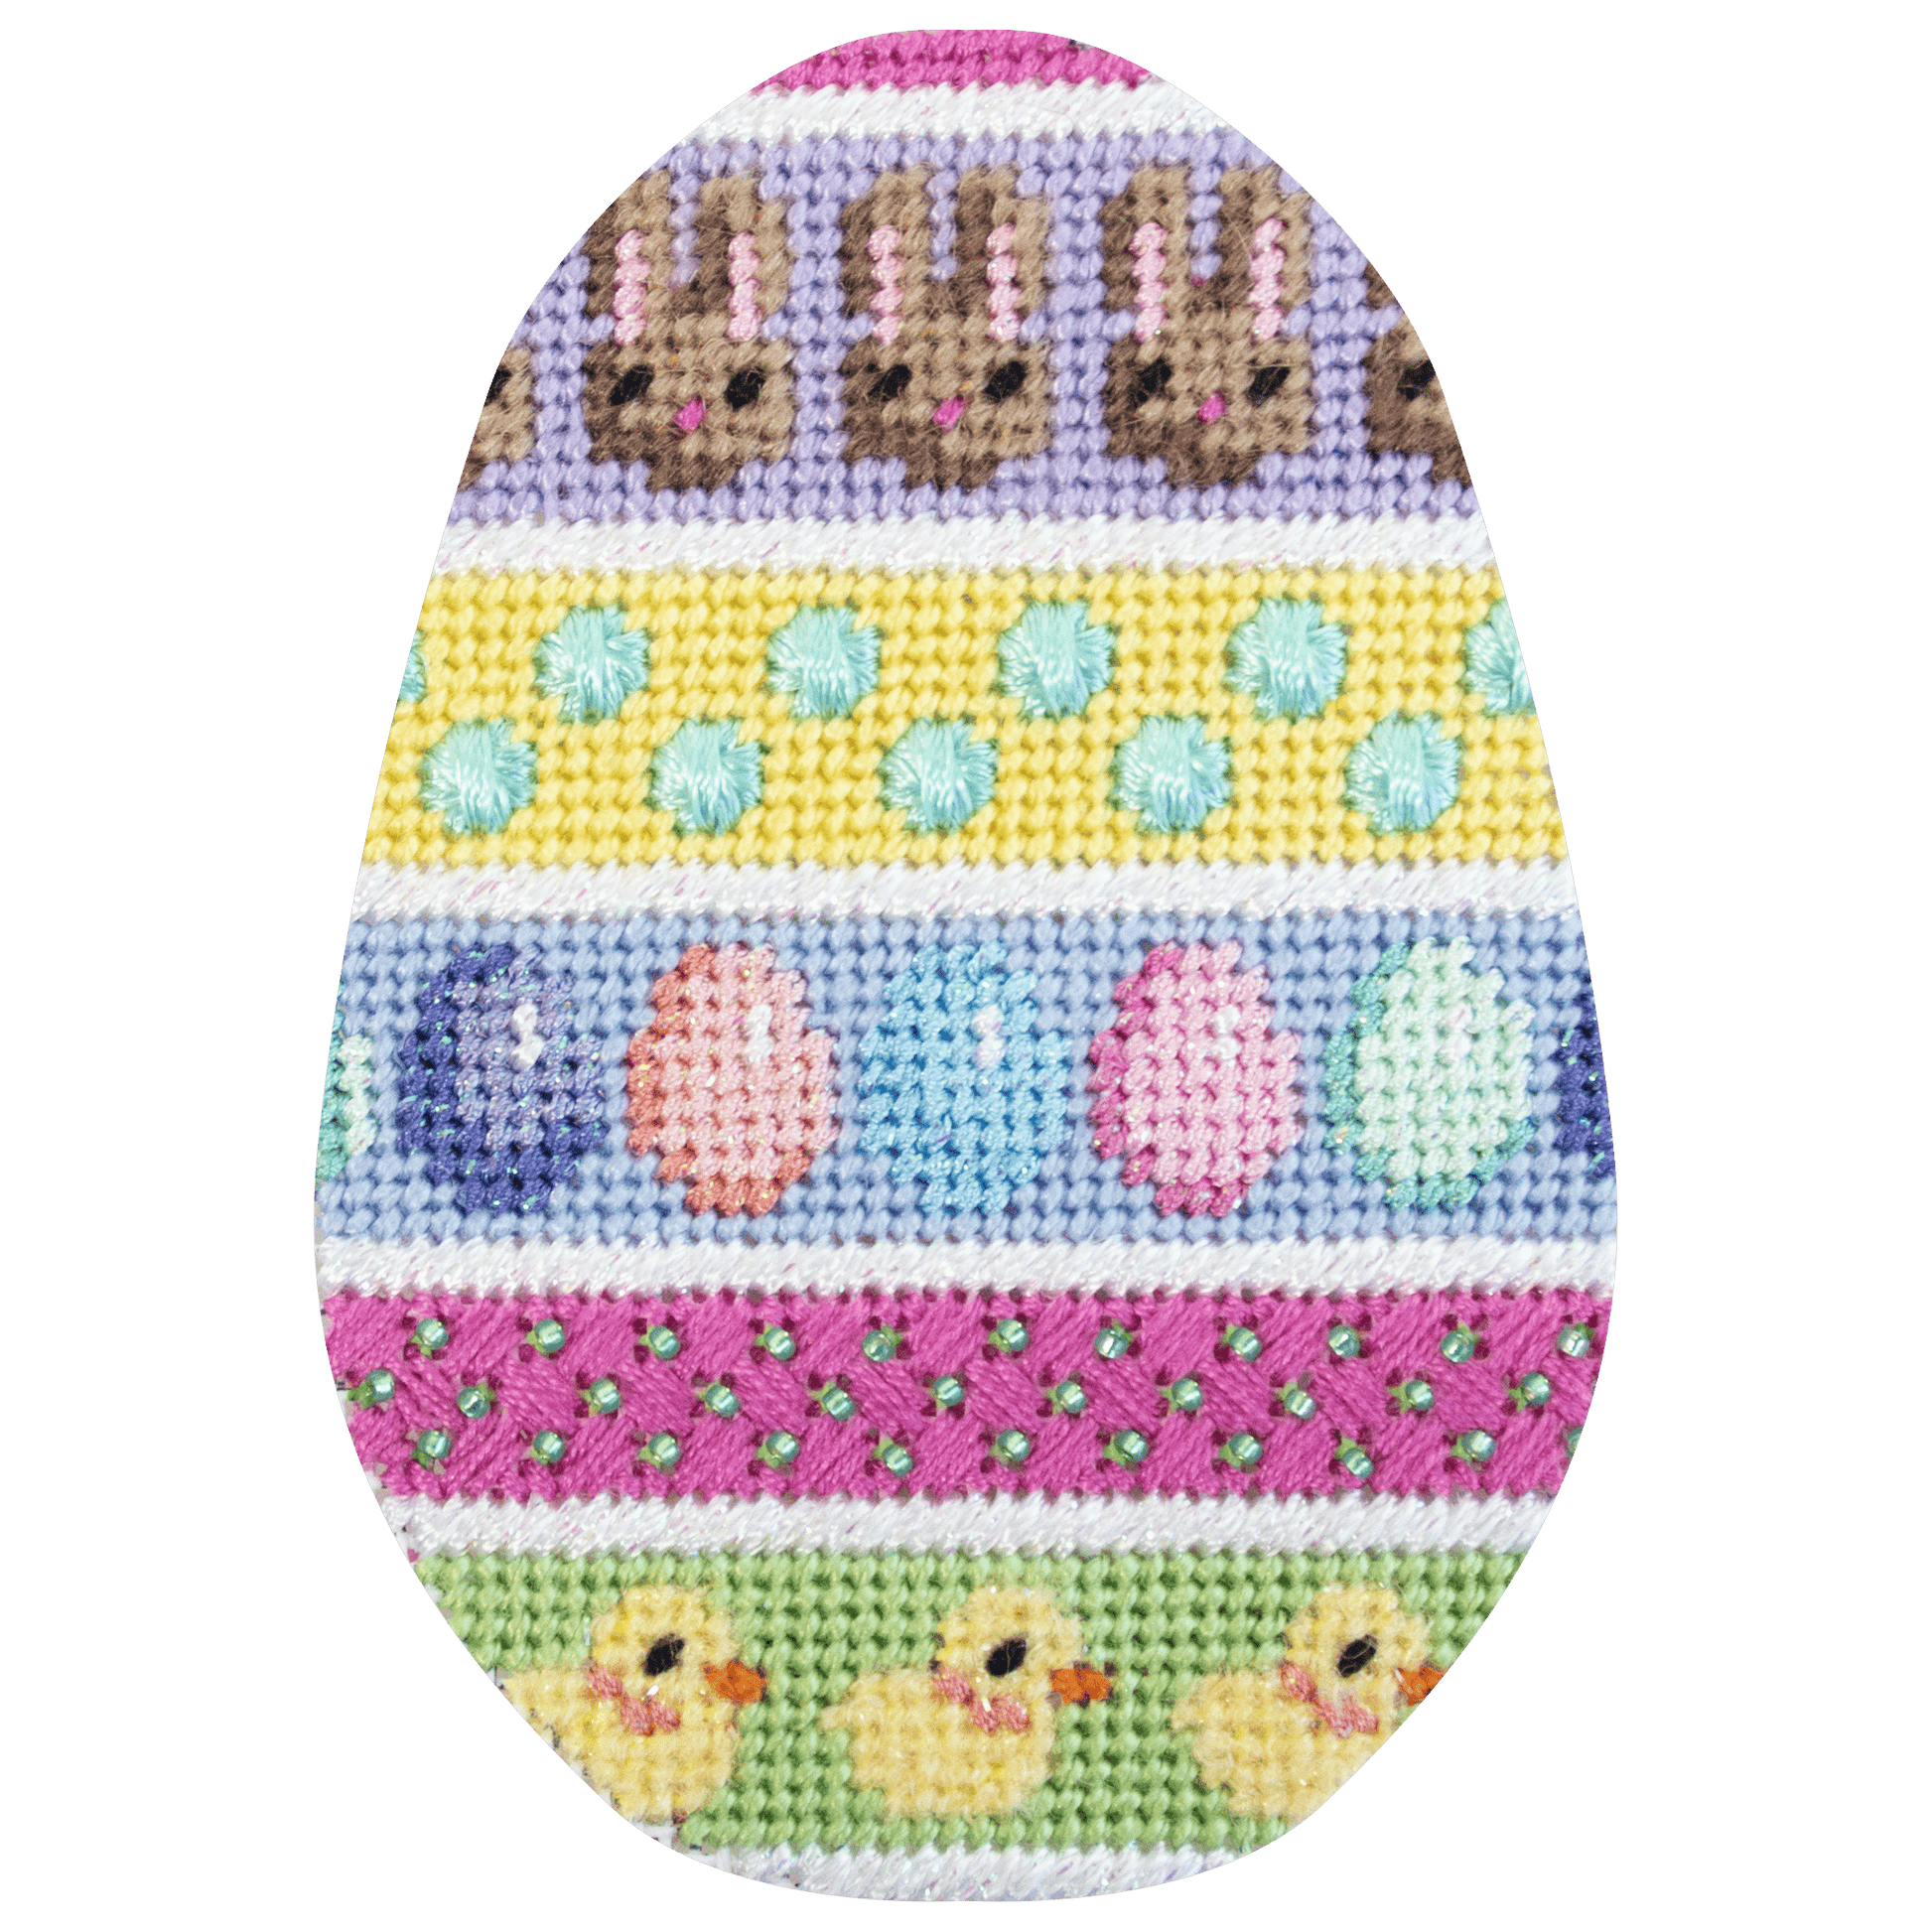 Bunnies/Eggs/Chicks Horizontal Striped Egg with Stitch Guide Painted Canvas Associated Talents 